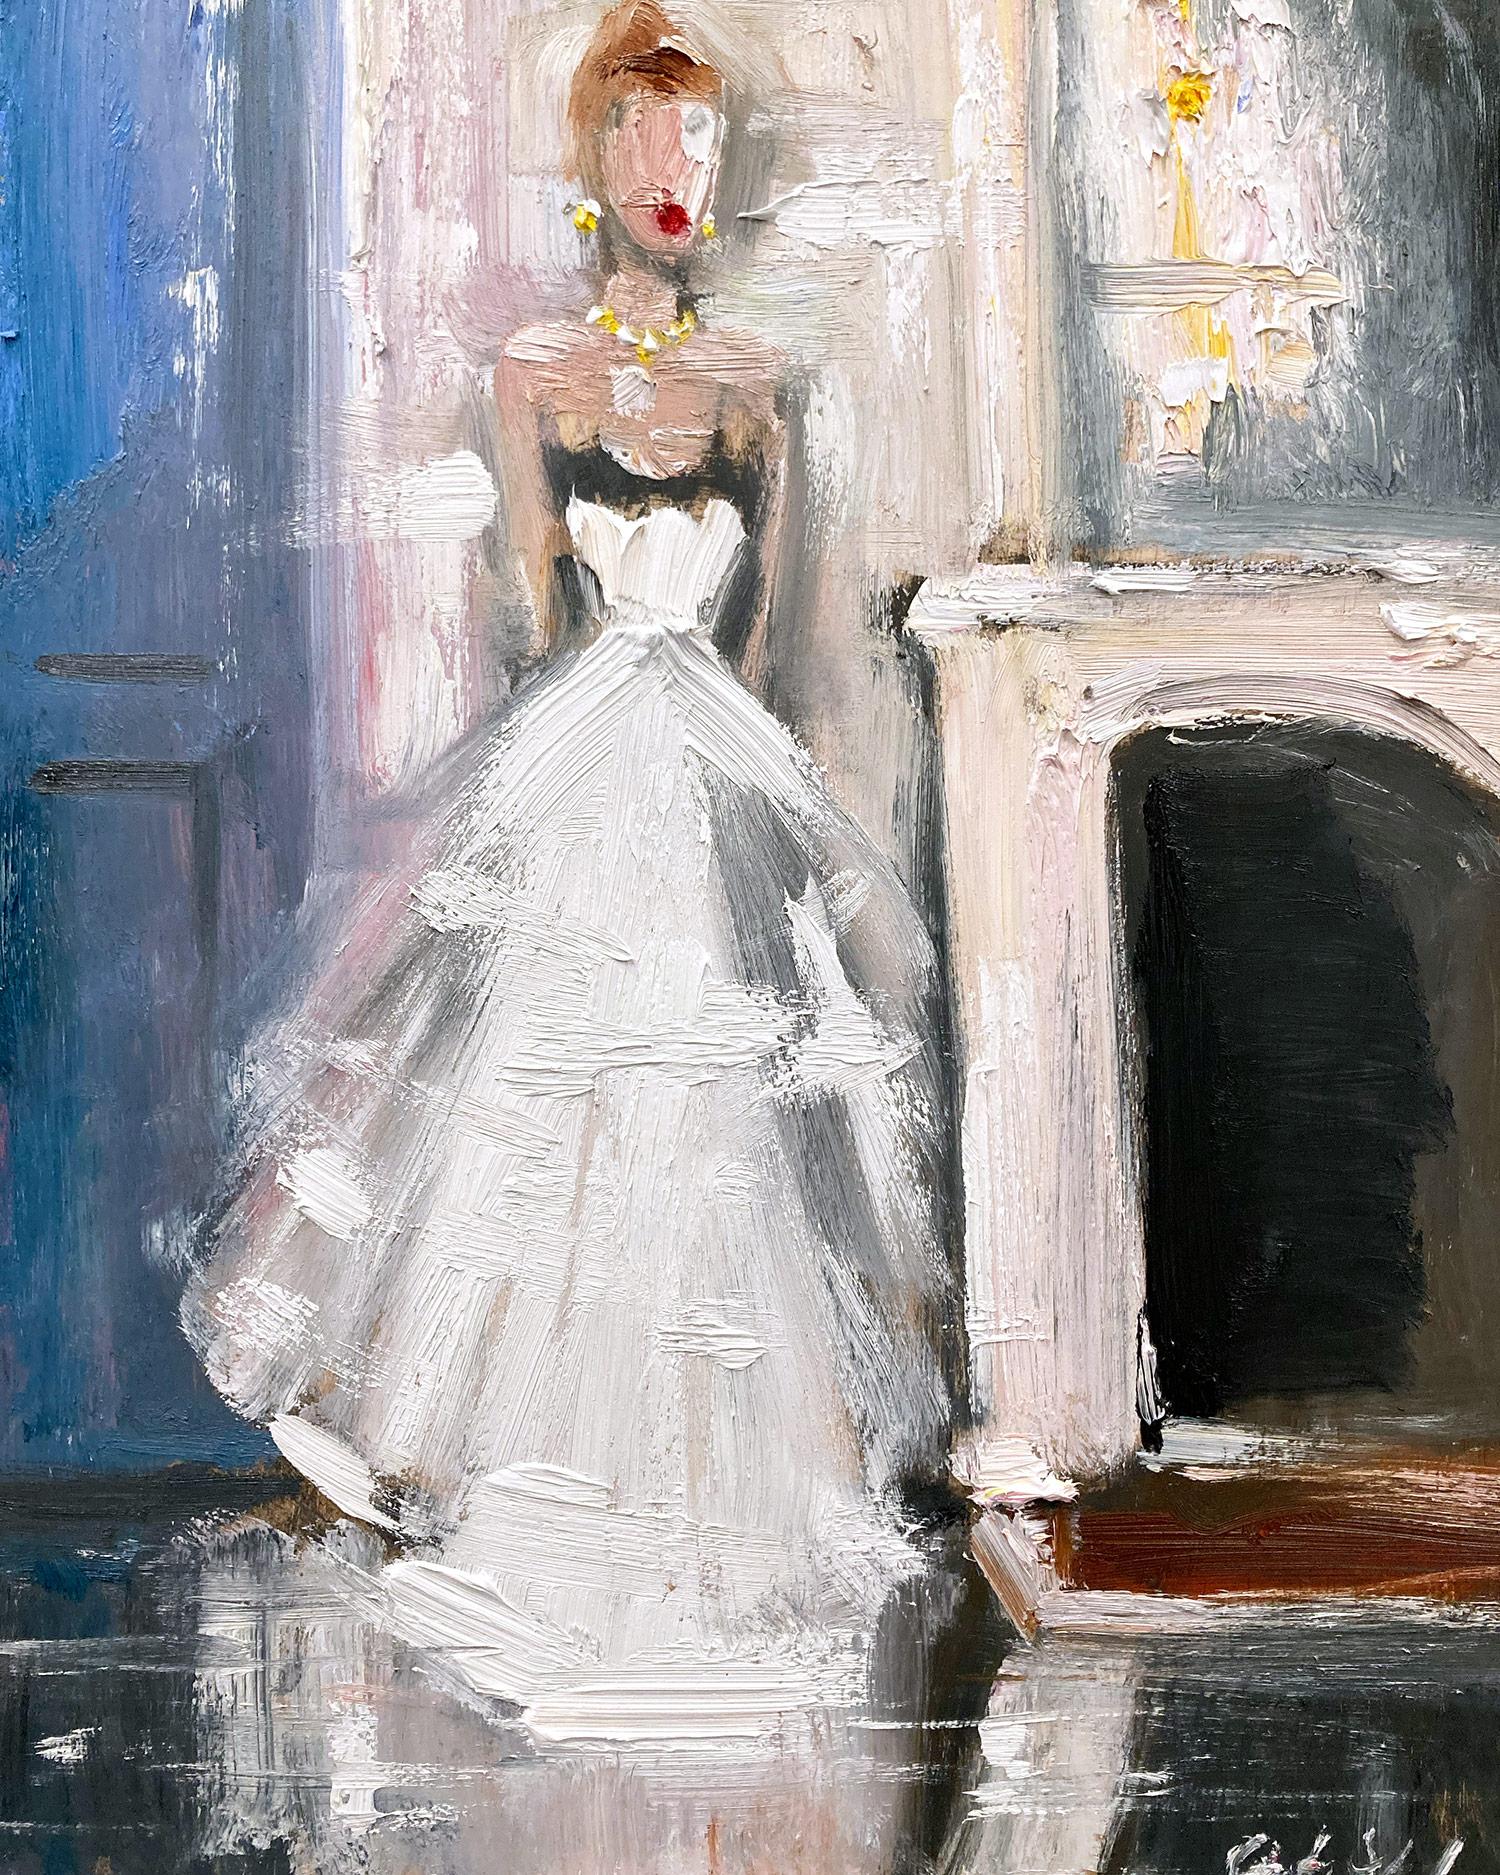 „As She Glimmers“ Interieur Haute Couture in Chanel Impressionistisches Ölgemälde – Painting von Cindy Shaoul